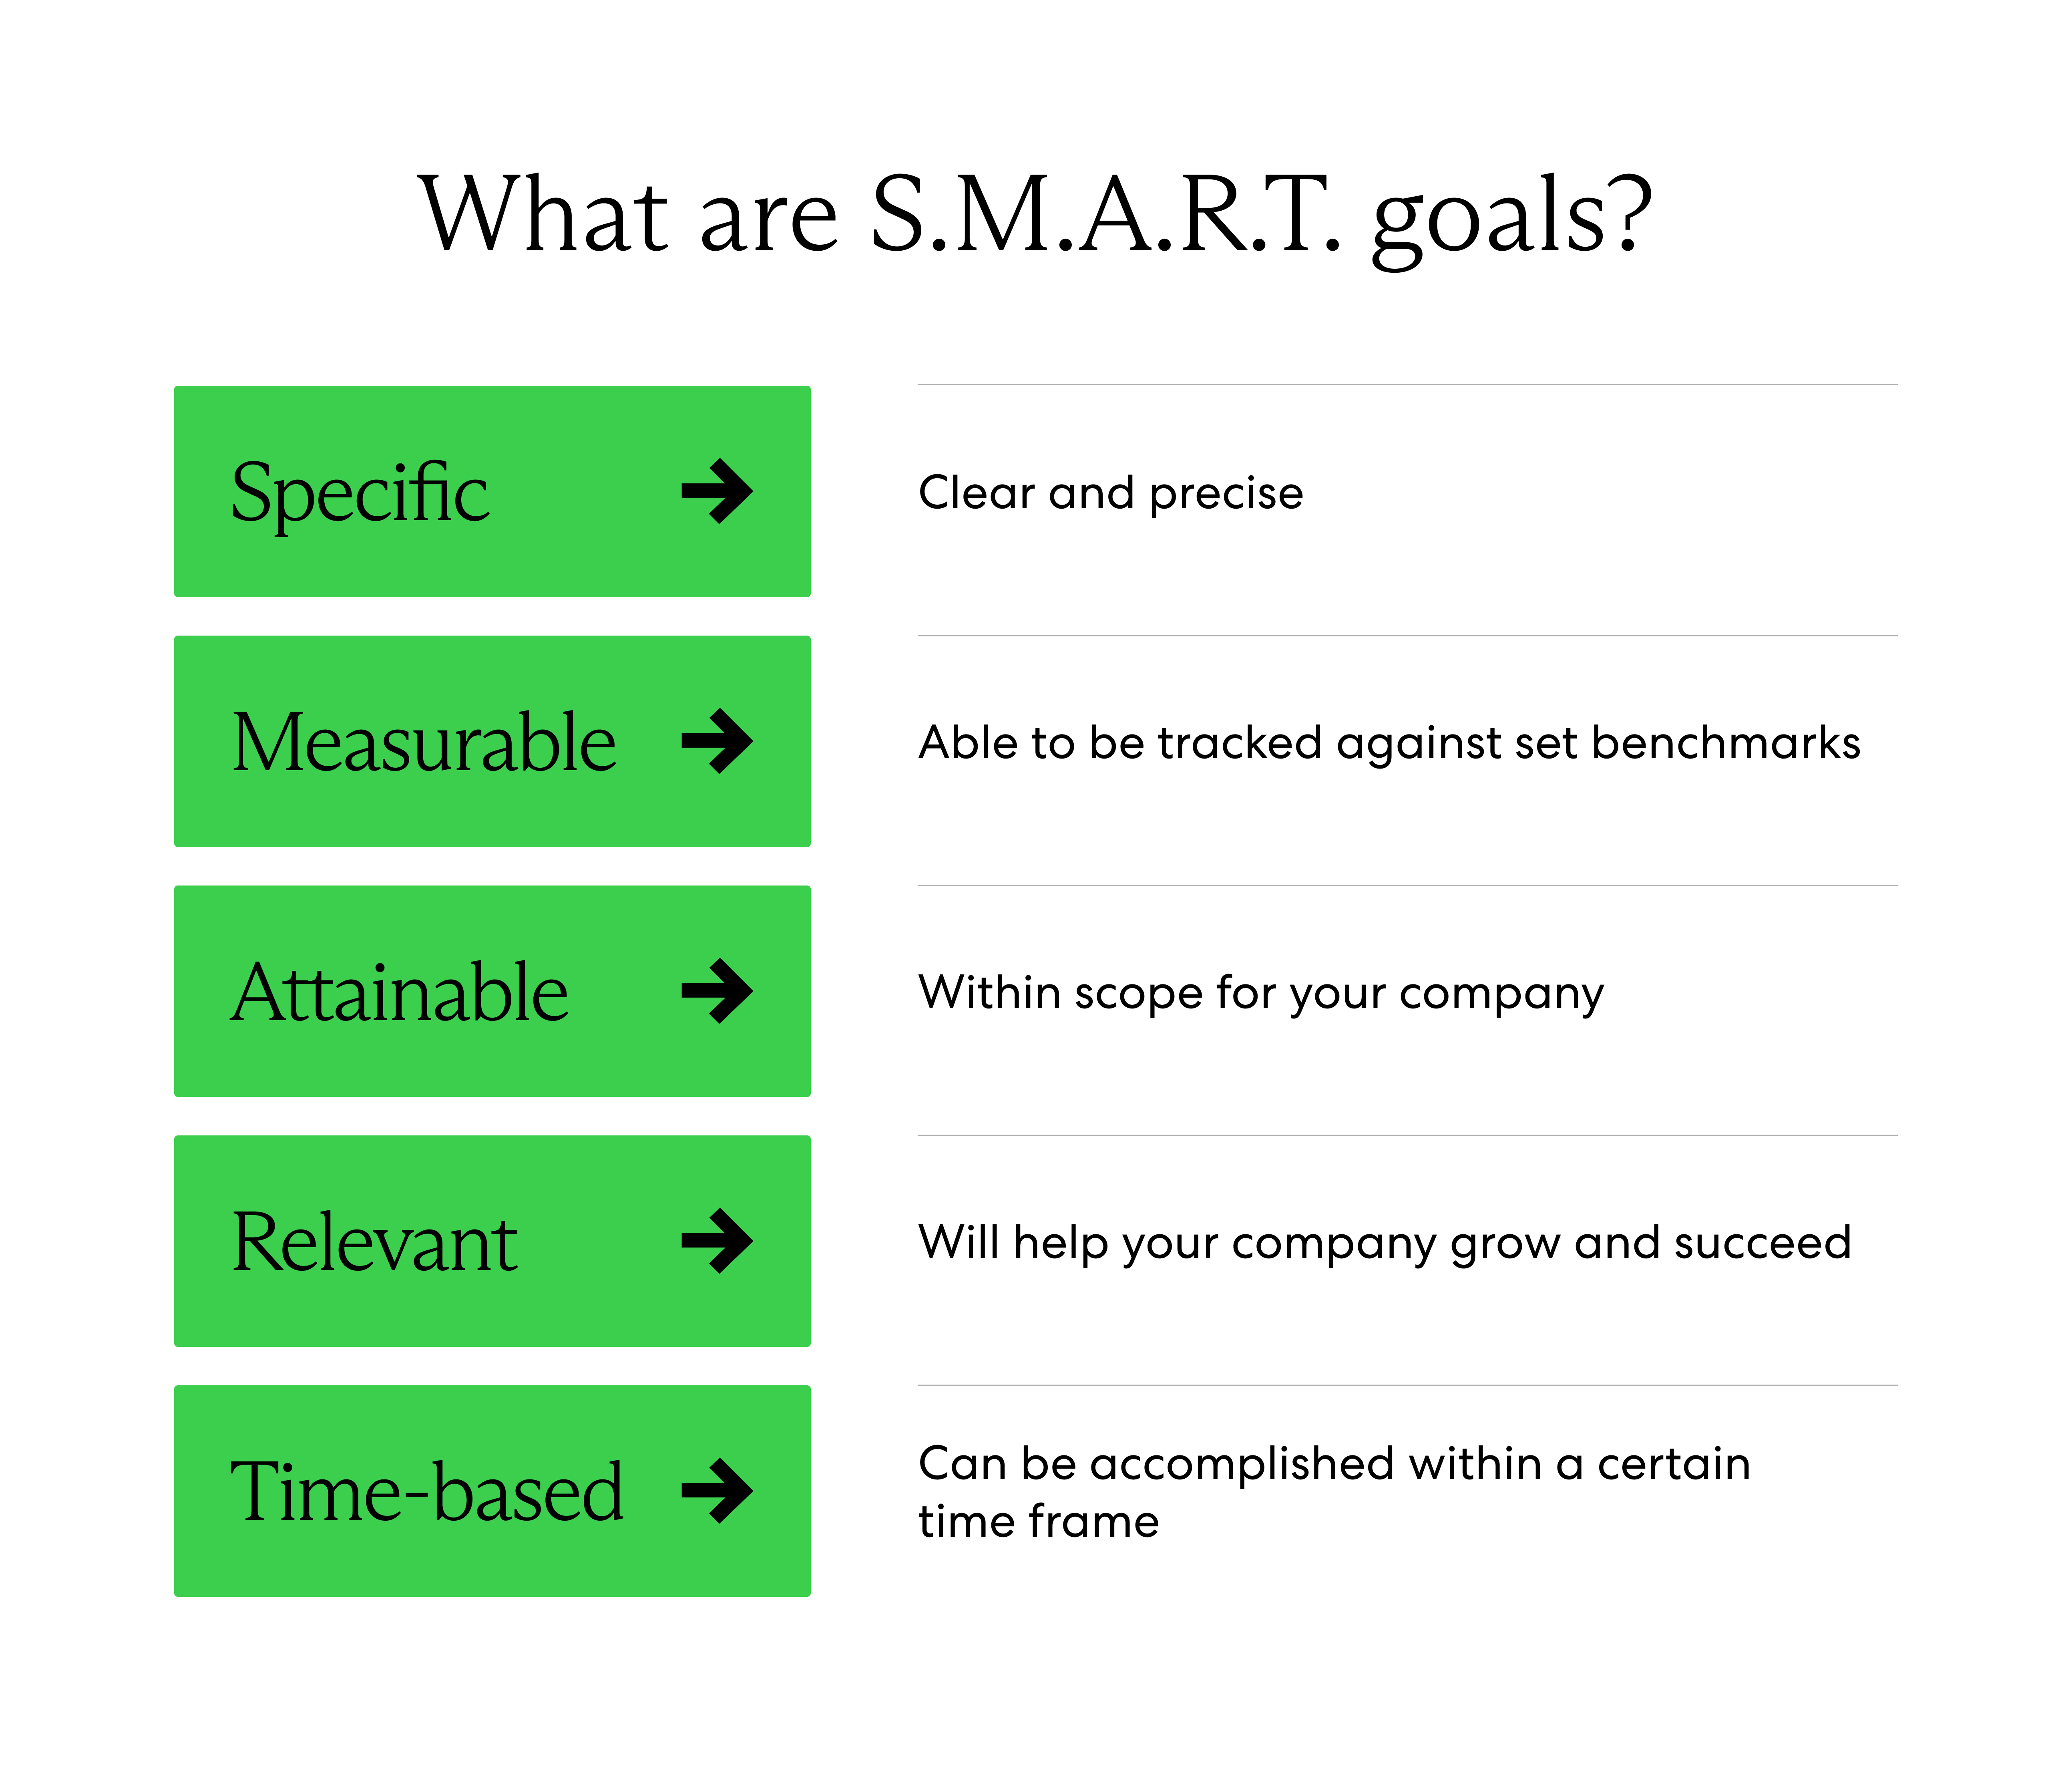 Smart goals are specific, measurable, attainable, relevant, and time-based